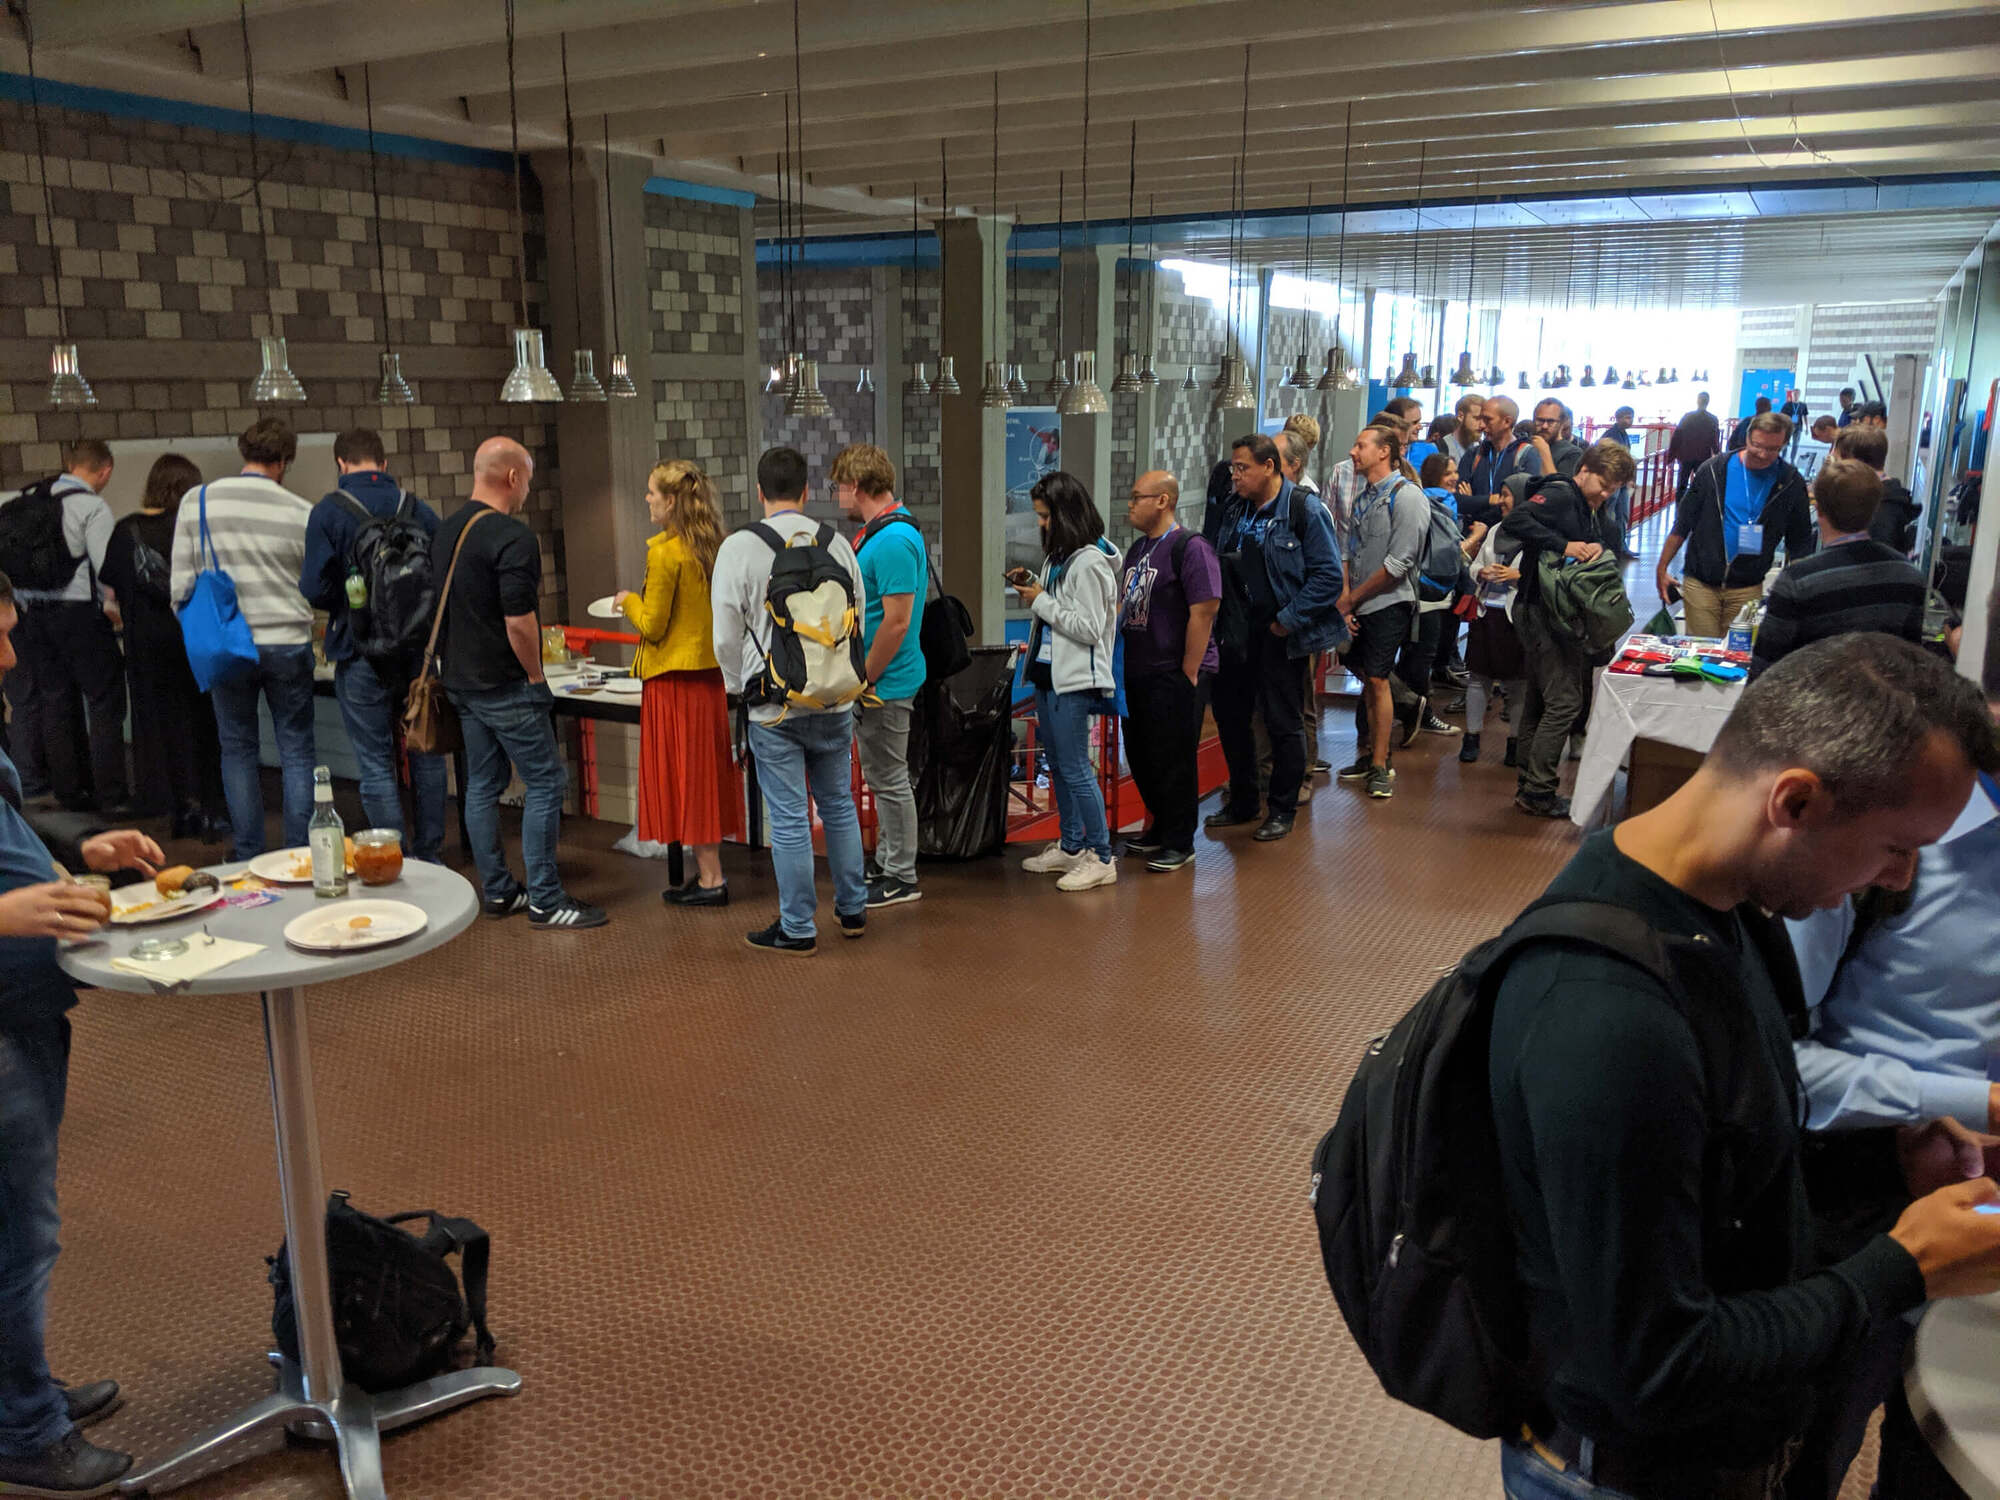 lunch line